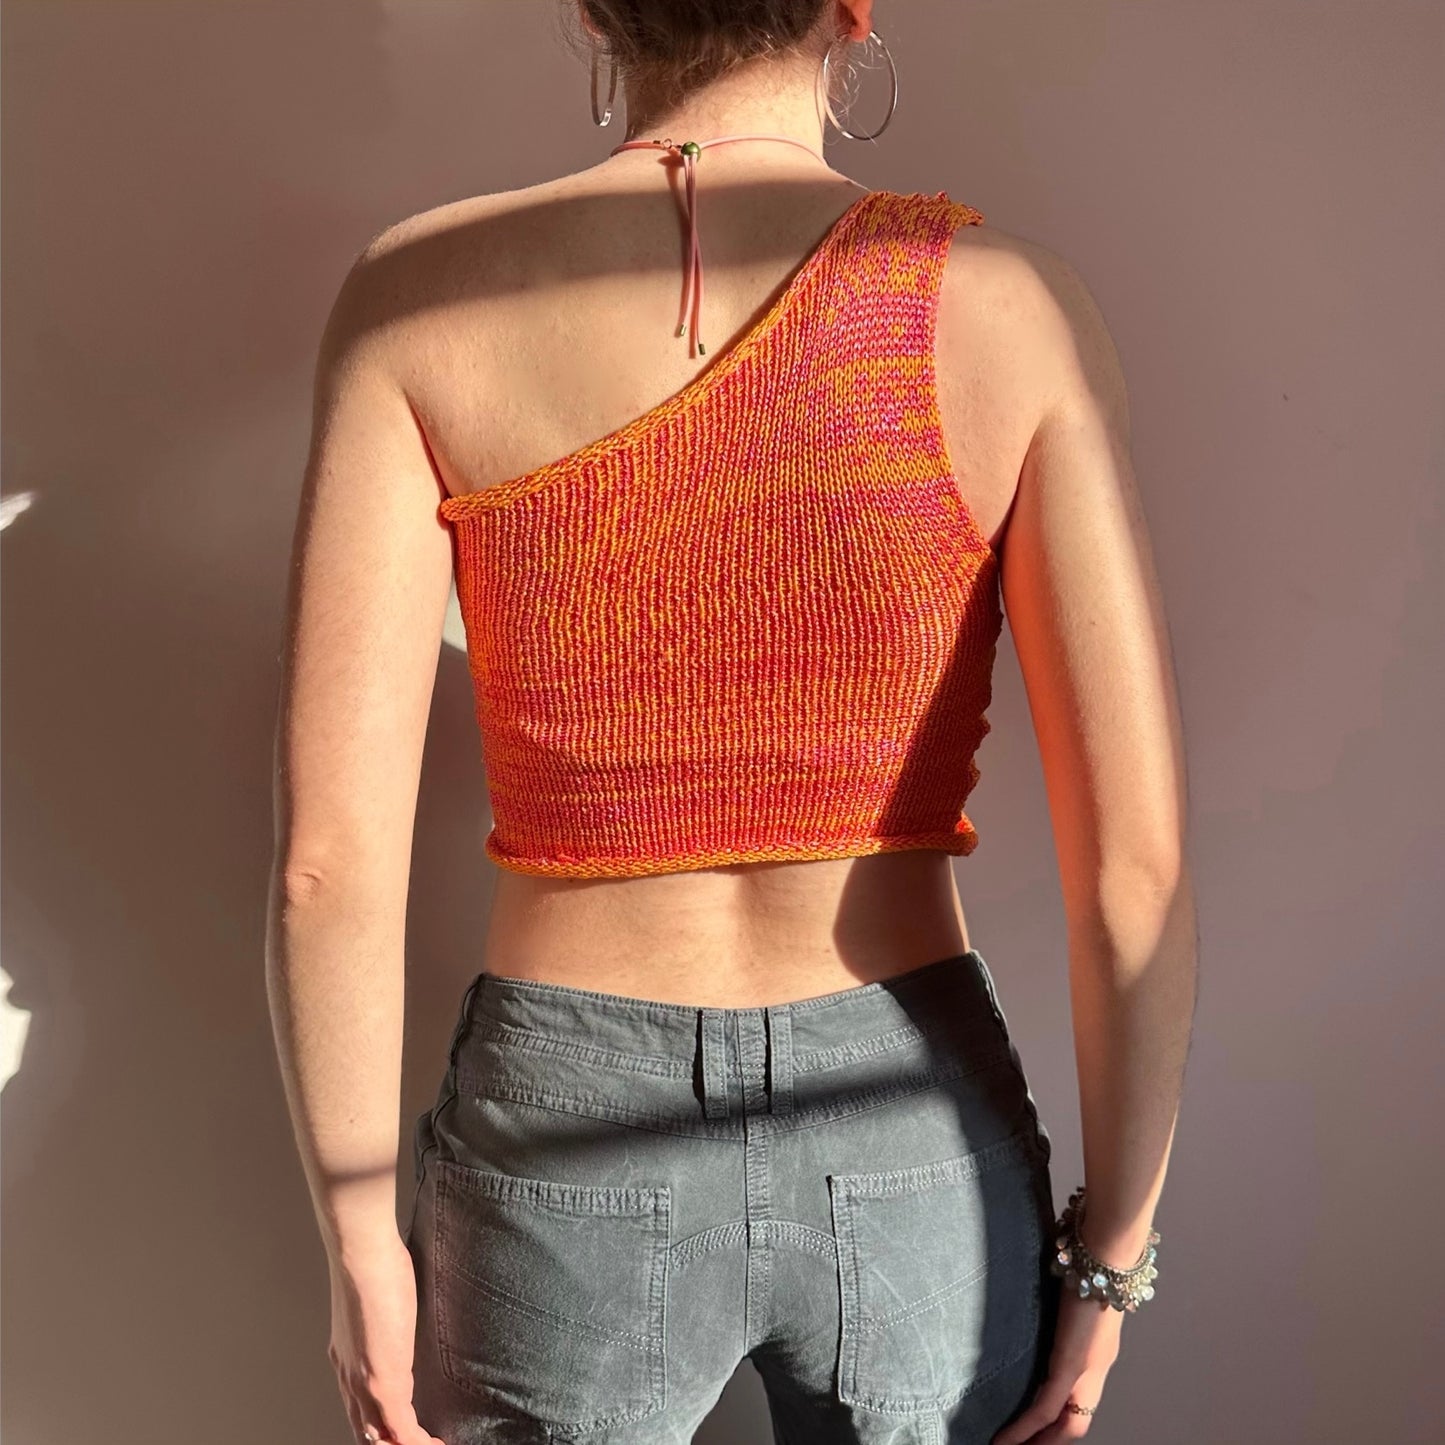 Handmade knitted metallic asymmetrical one shoulder top in orange and pink